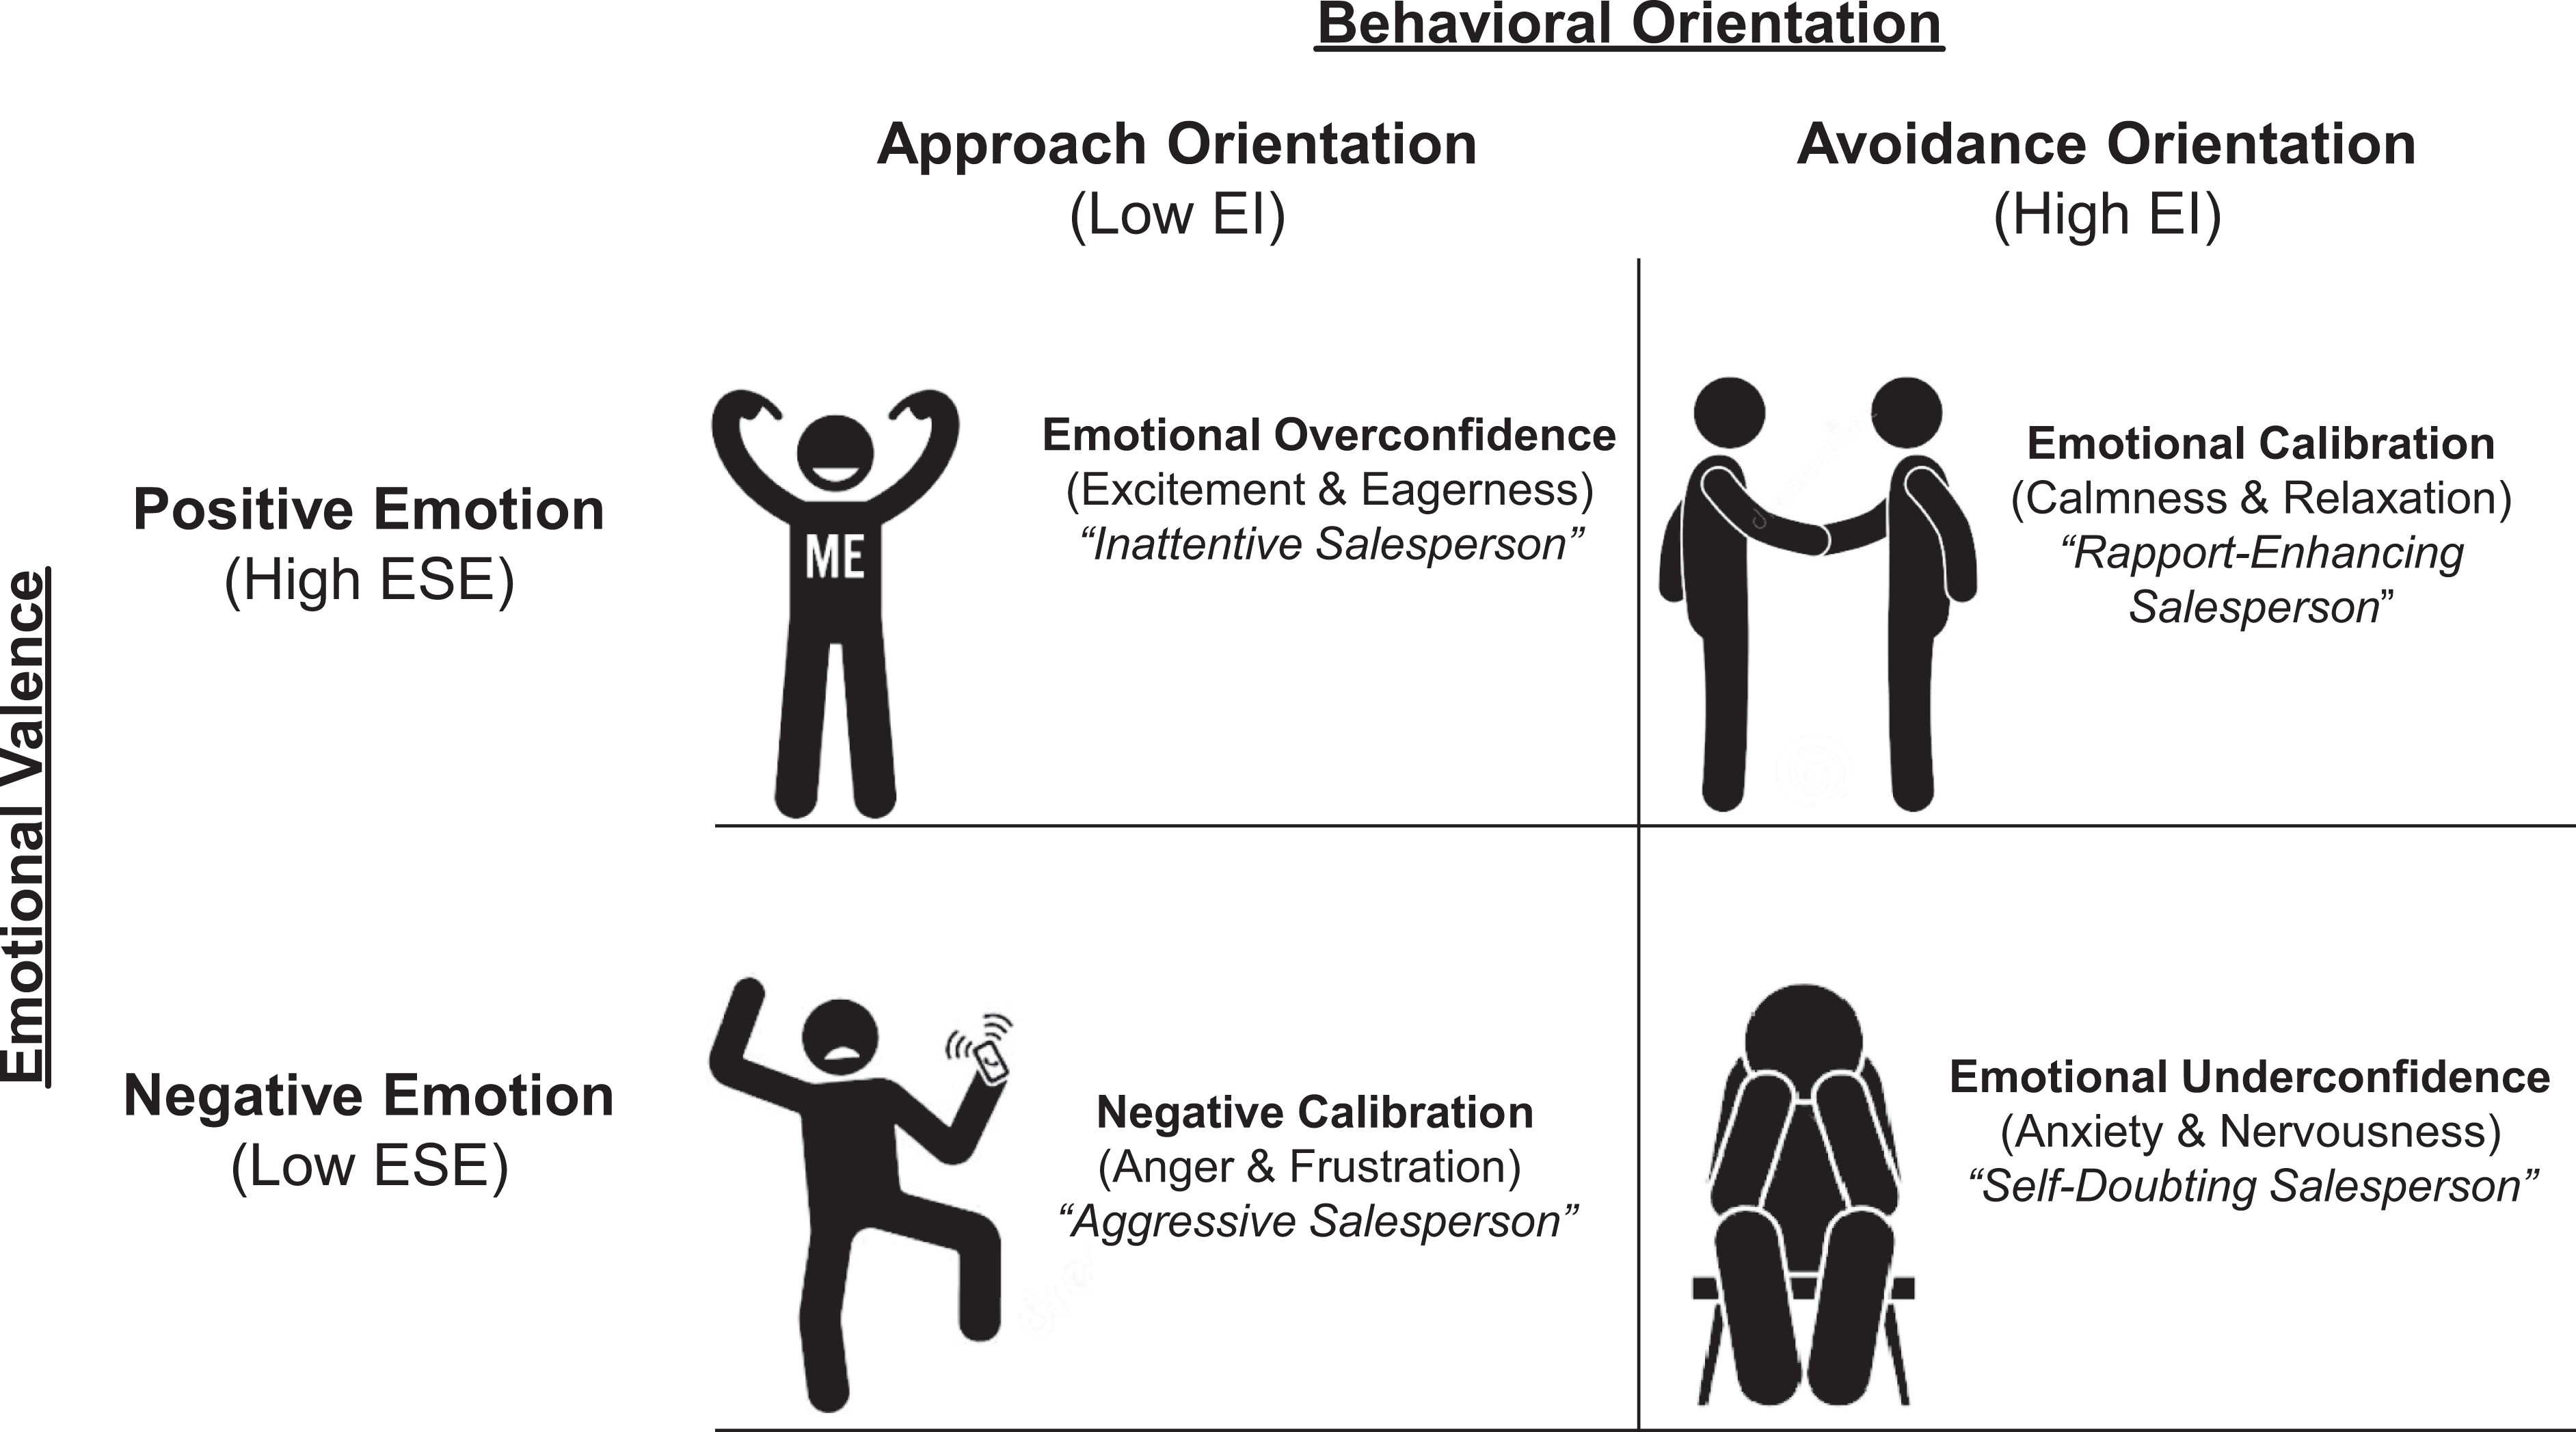 Image of Figure Used in Study Showing Relationship Between Emotional Valence and Behavioral Orientation